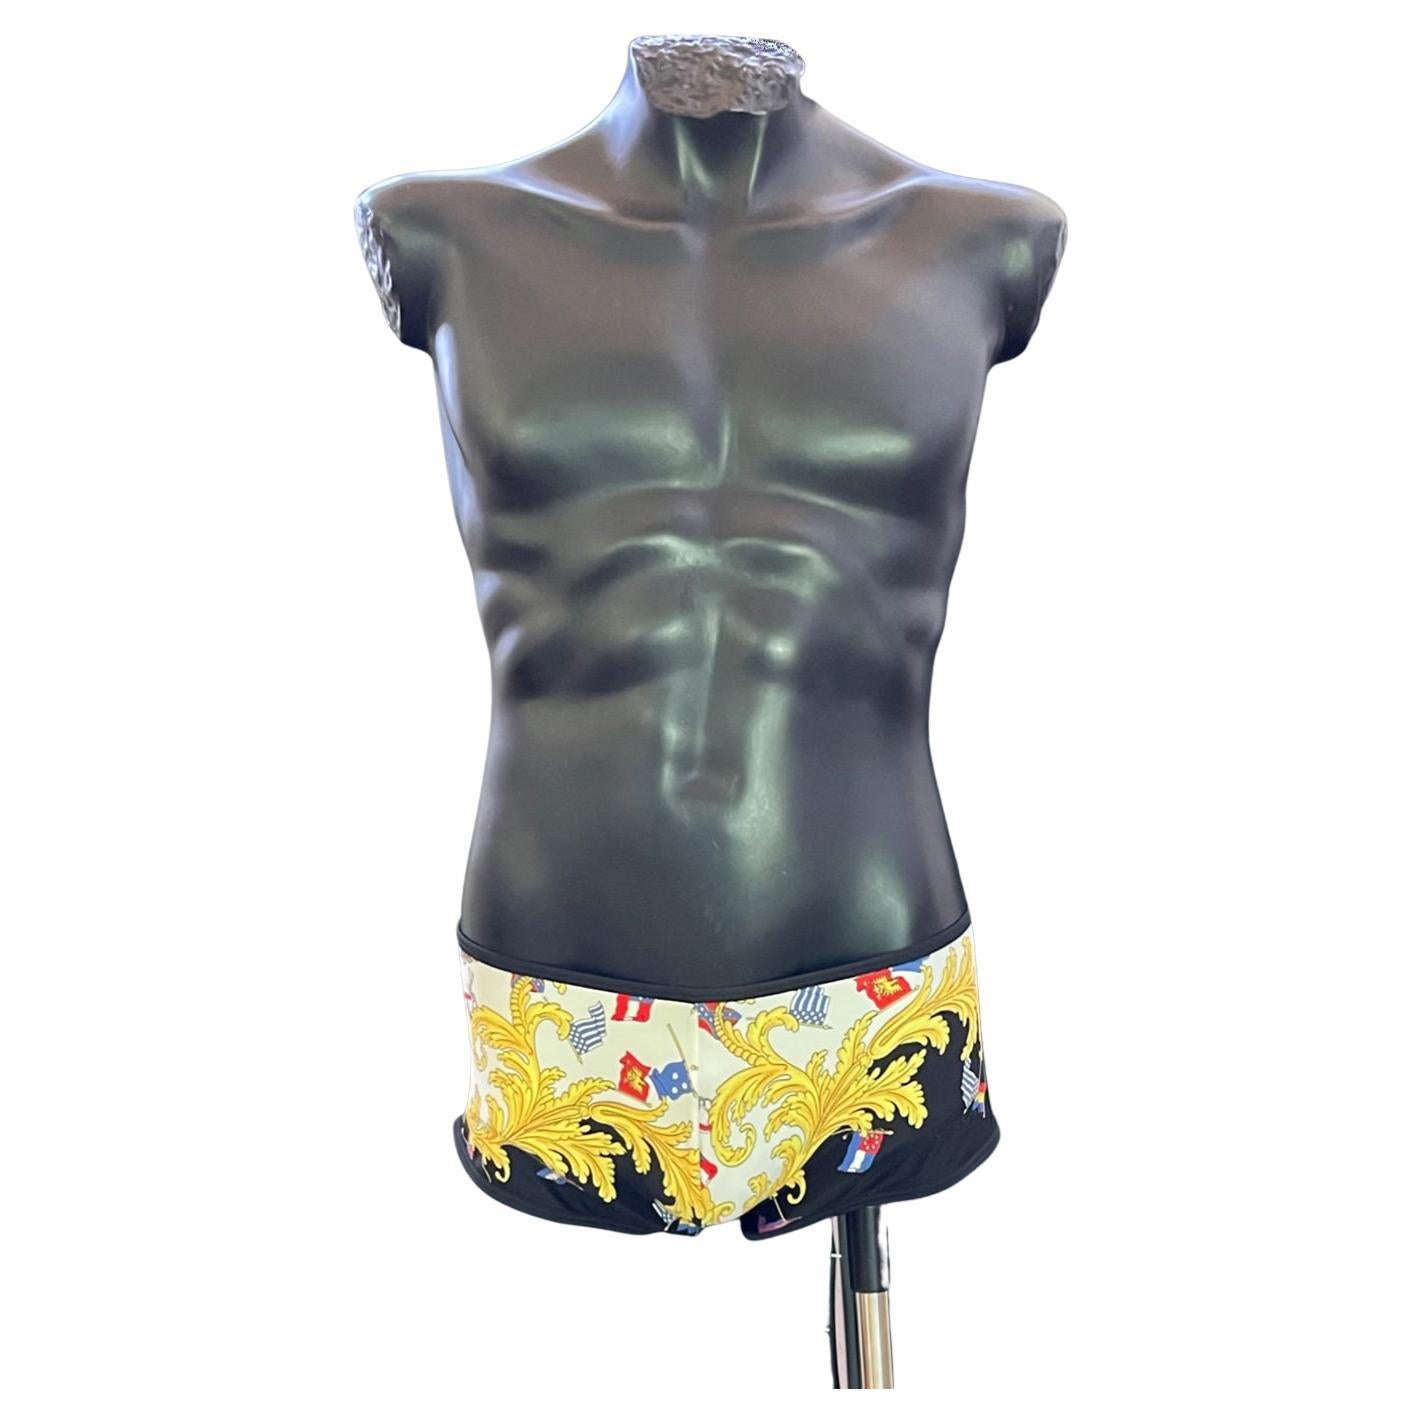 VERSACE BAROQUE PRINT SWIMMING TRUNKS Size Sz 5 For Sale